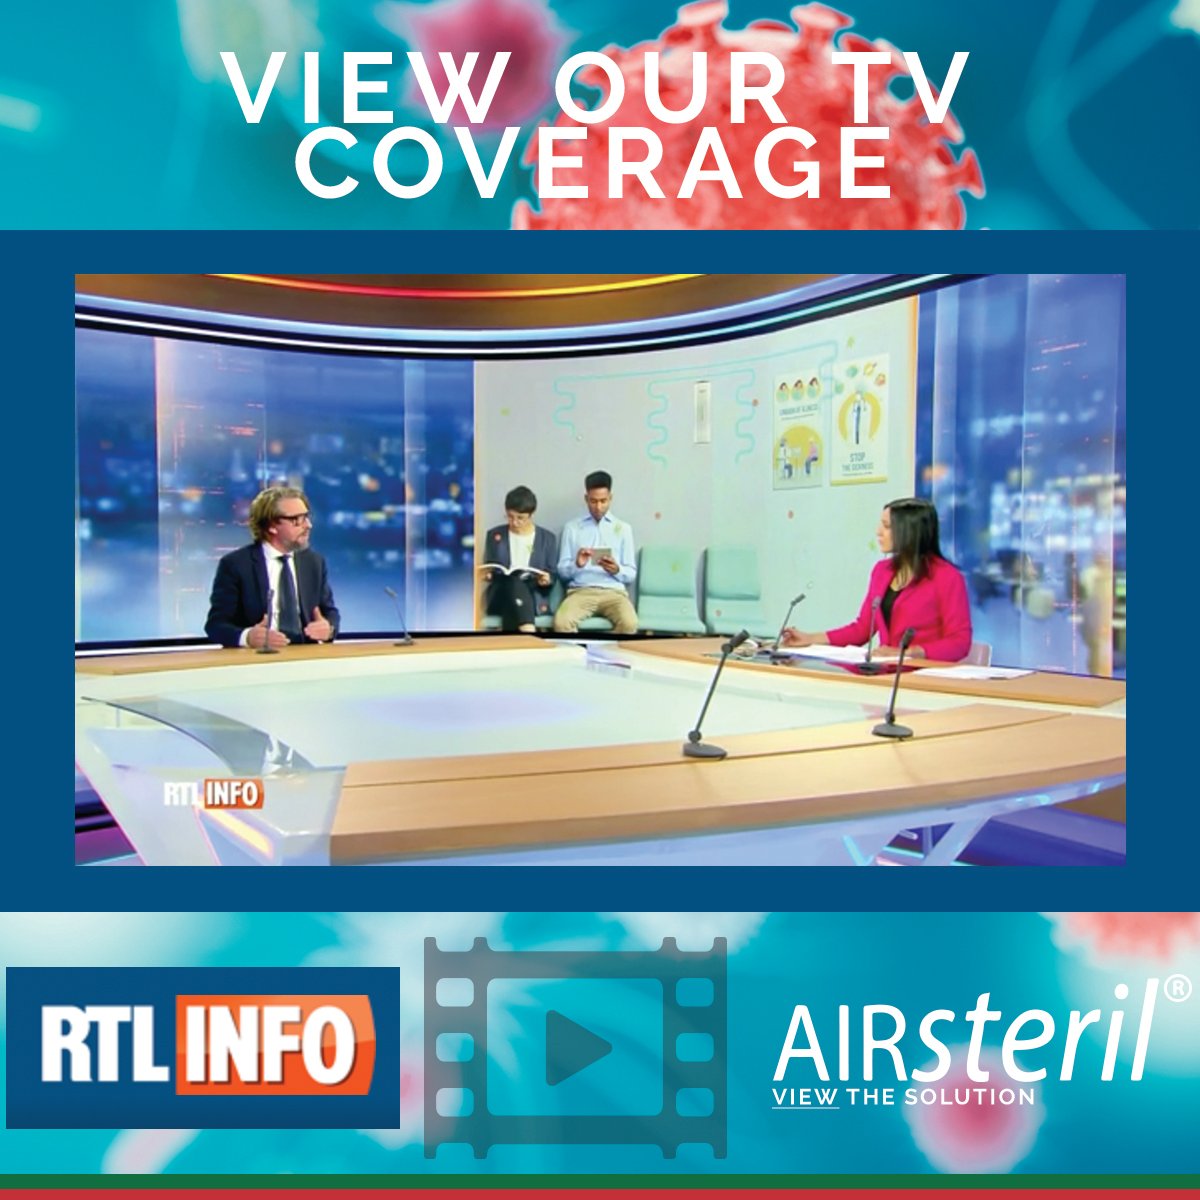 View our latest TV coverage here daxairscience.co.uk/news-coronavir…. AIRsteril products have been a key part in the drive to reopen many businesses... #daxairscience #tvcovrage #coronavirusrtltvcoverage #coronavirusnews